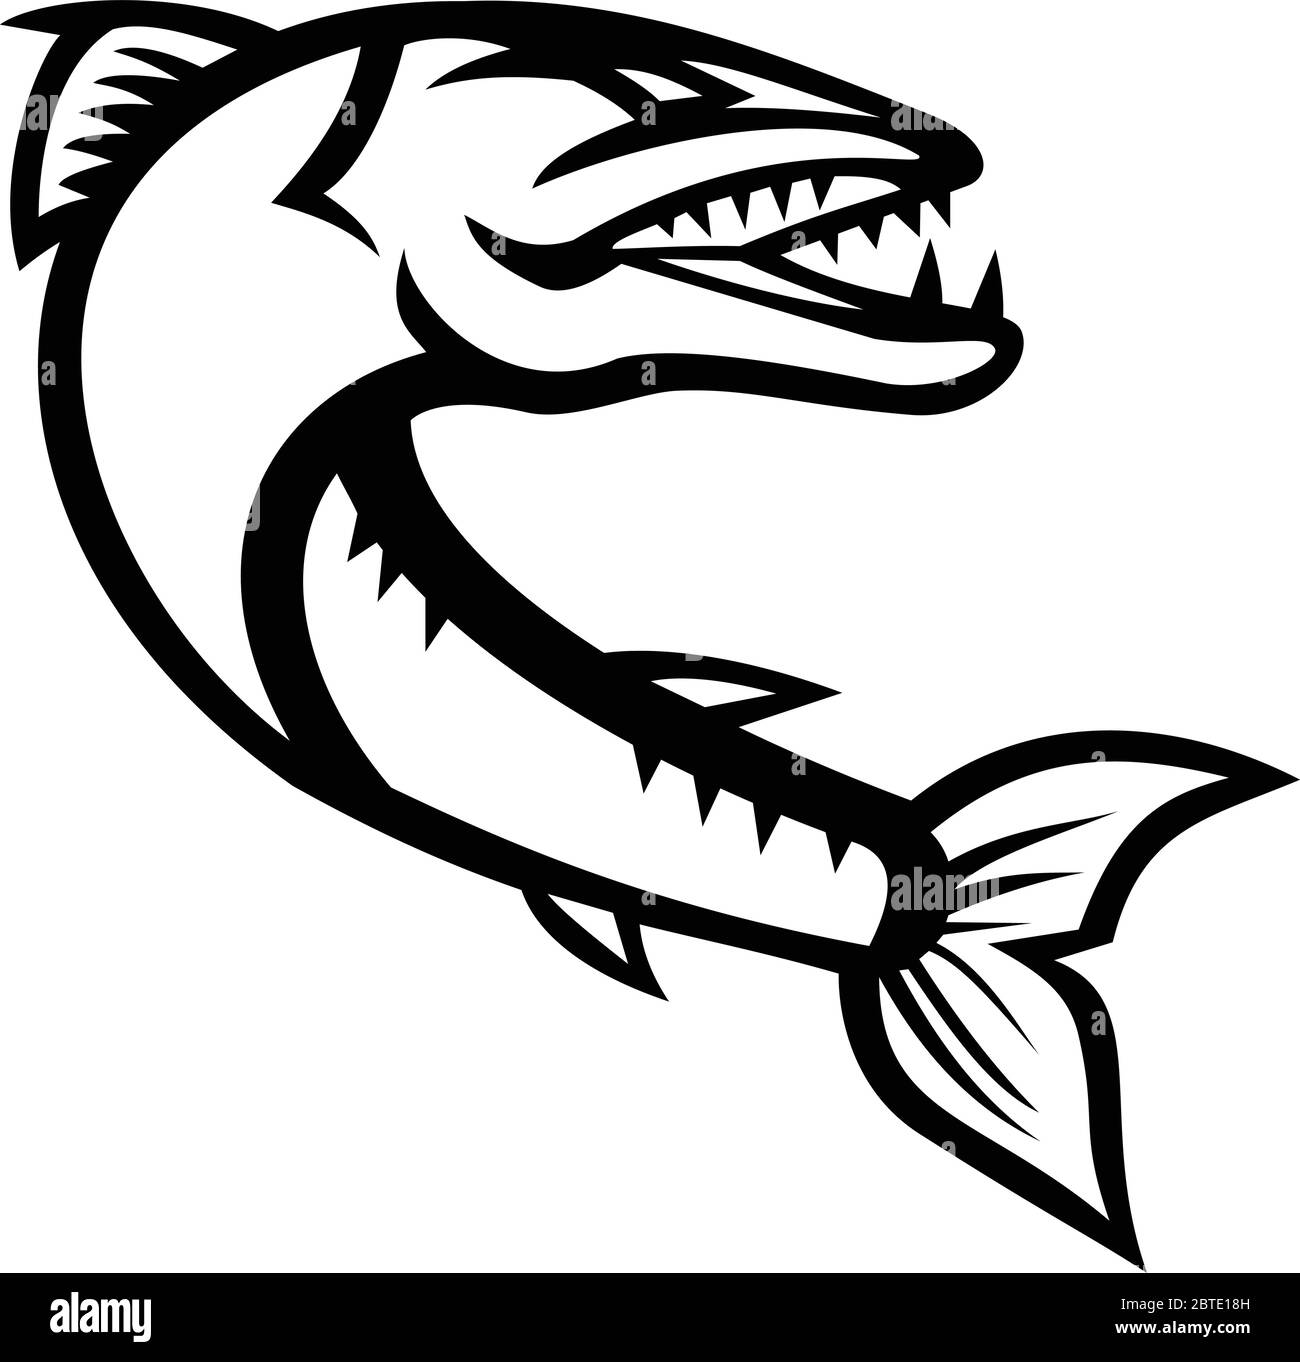 Mascot icon illustration of an angry great barracuda, a saltwater fish that is snake like with fearsome appearance and ferocious behavior, jumping on Stock Vector